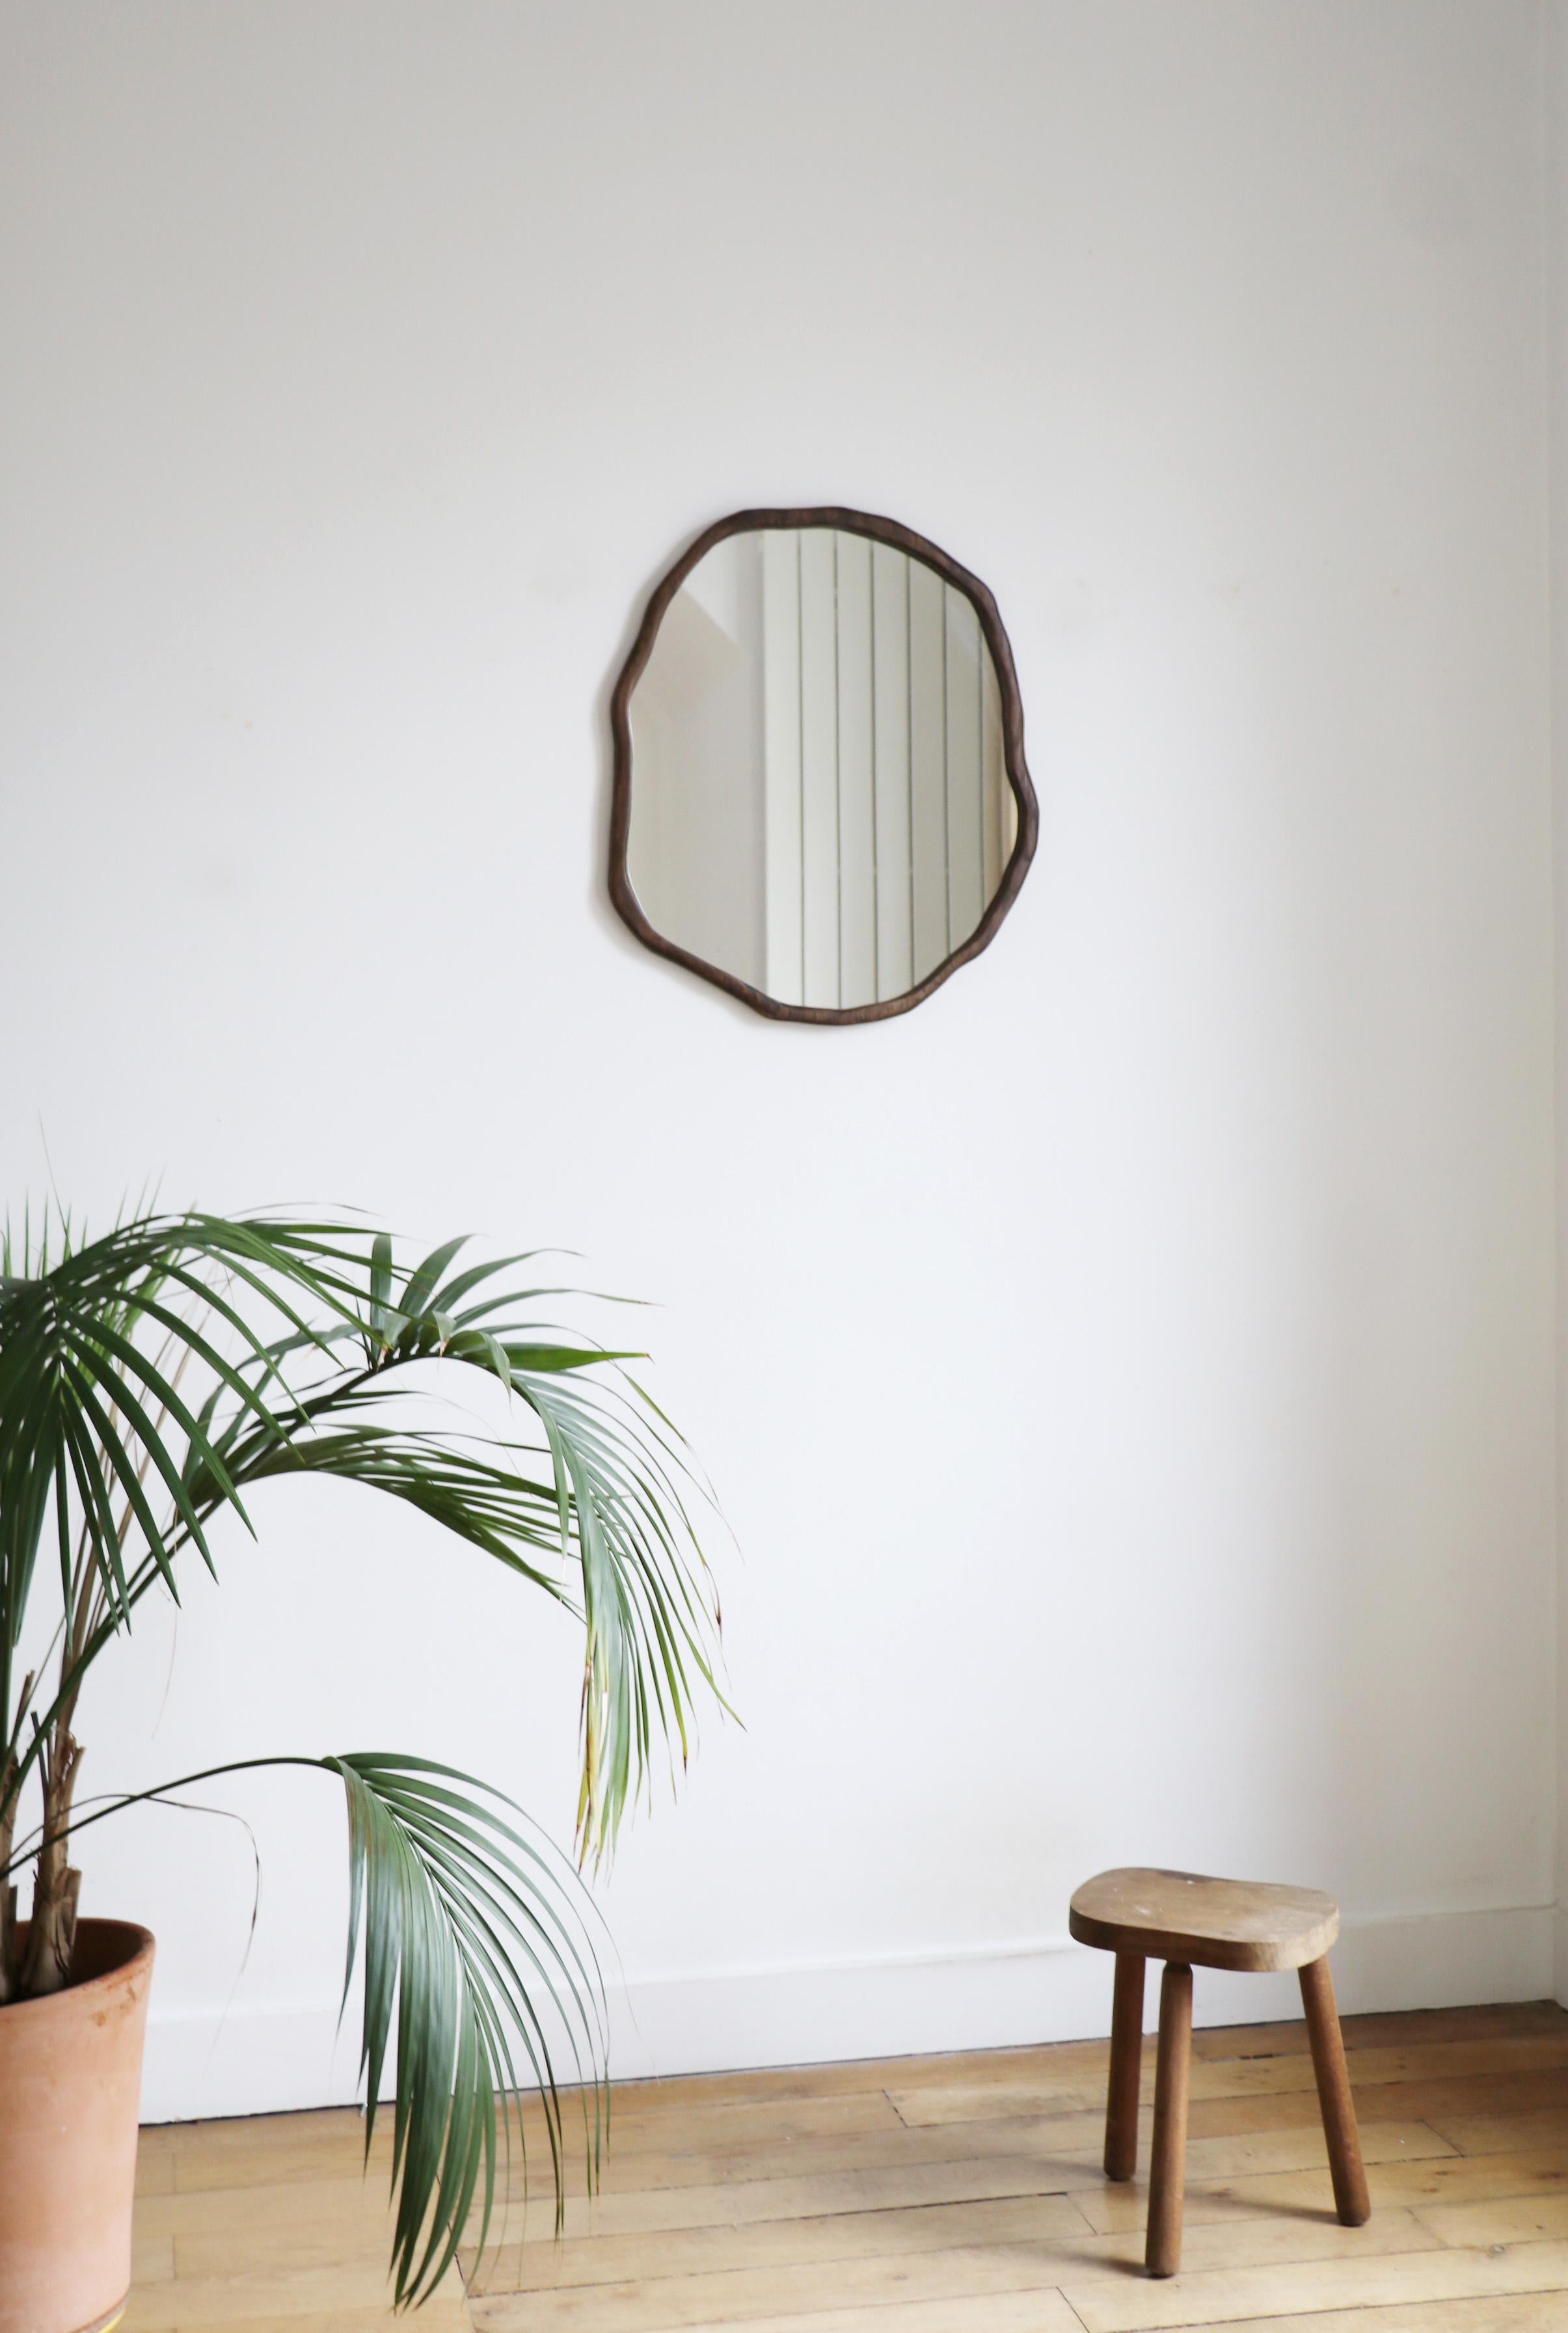 Medium Dark Varnish Ondulation mirror by Alice Lahana Studio
One of a kind.
Dimensions: Ø 50 x H 60 cm.
Materials: Dark Oak.
Available finishes: Dark and light varnish.

Every mirror is unique. The shape slightly varies from edition to edition.